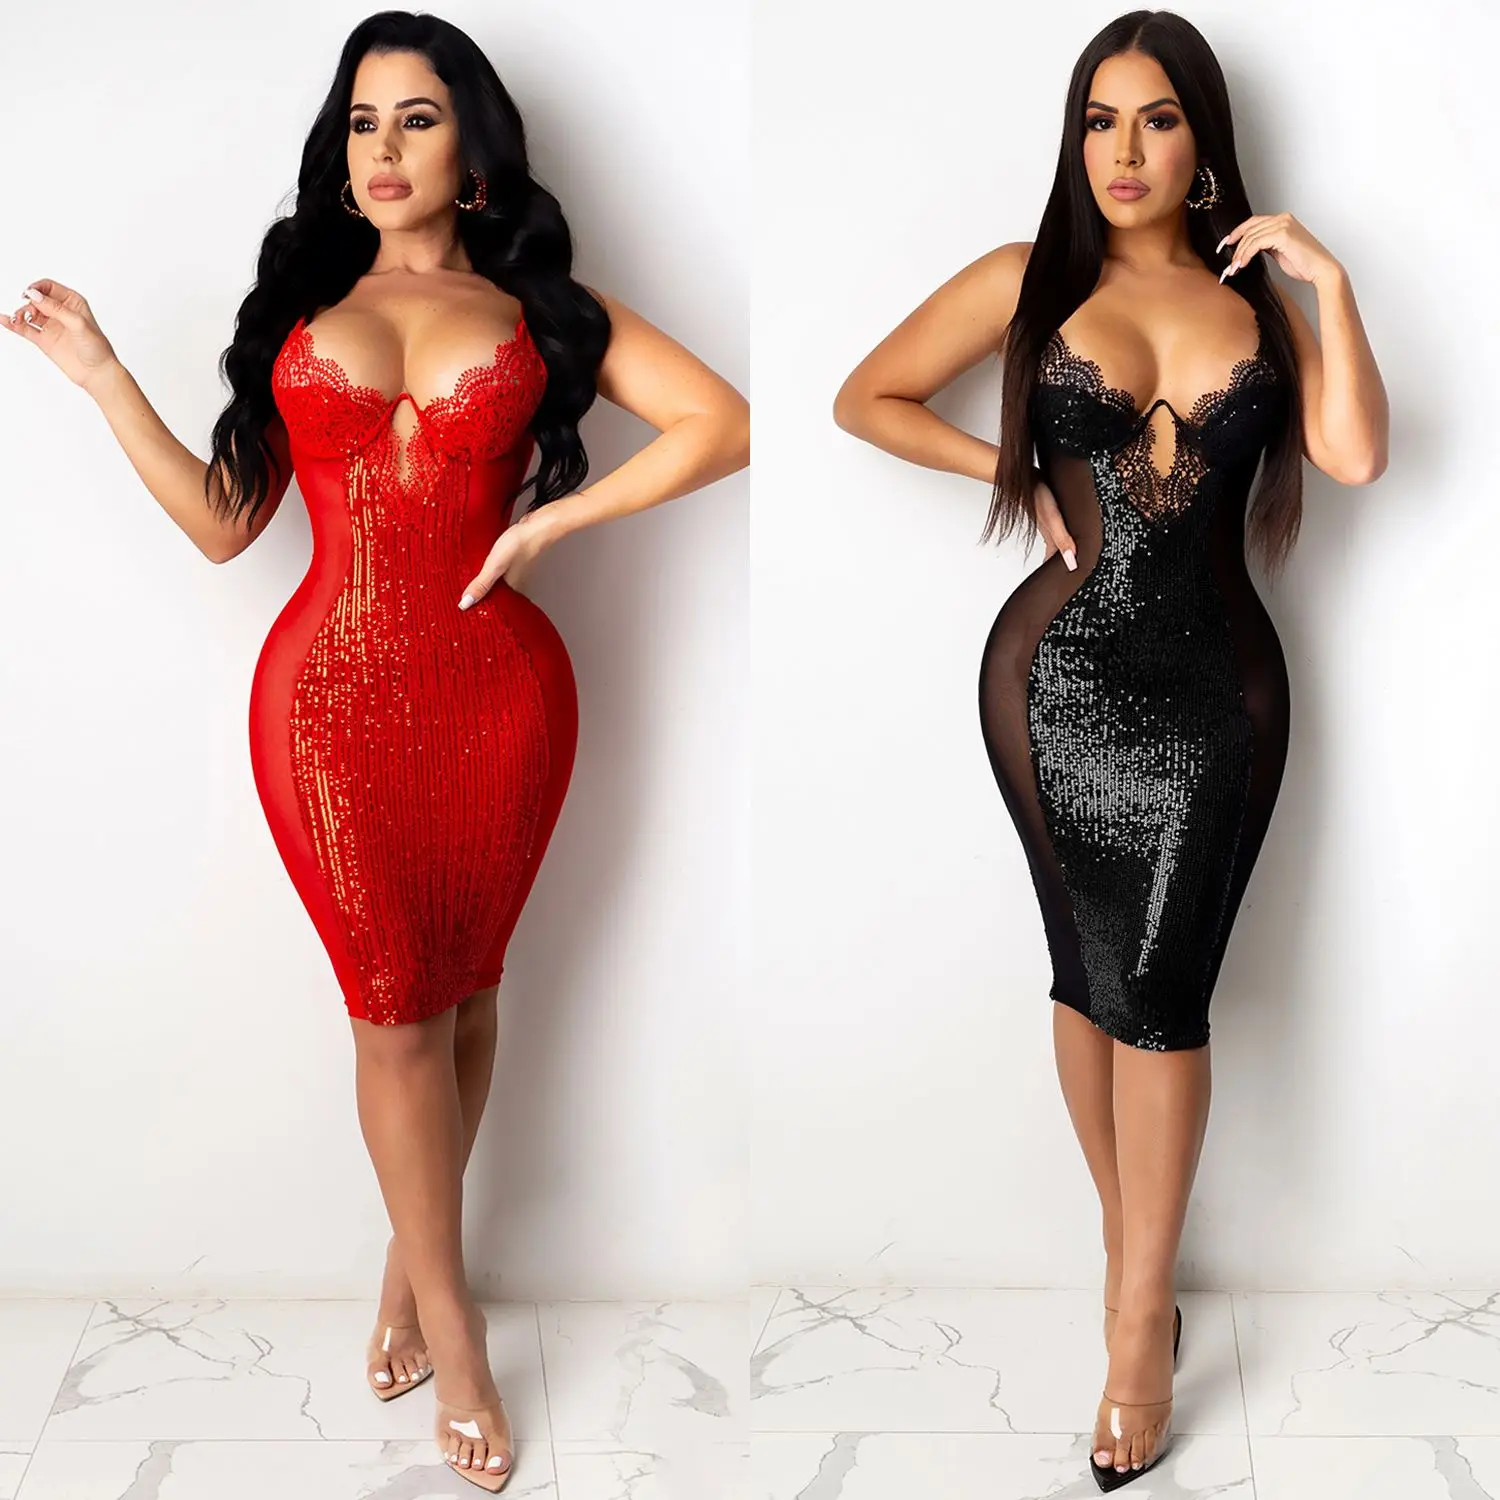 

FREE SAMPLE JHTH New product women's nightclub sexy suspender dress Amazon AliExpress sequin lace